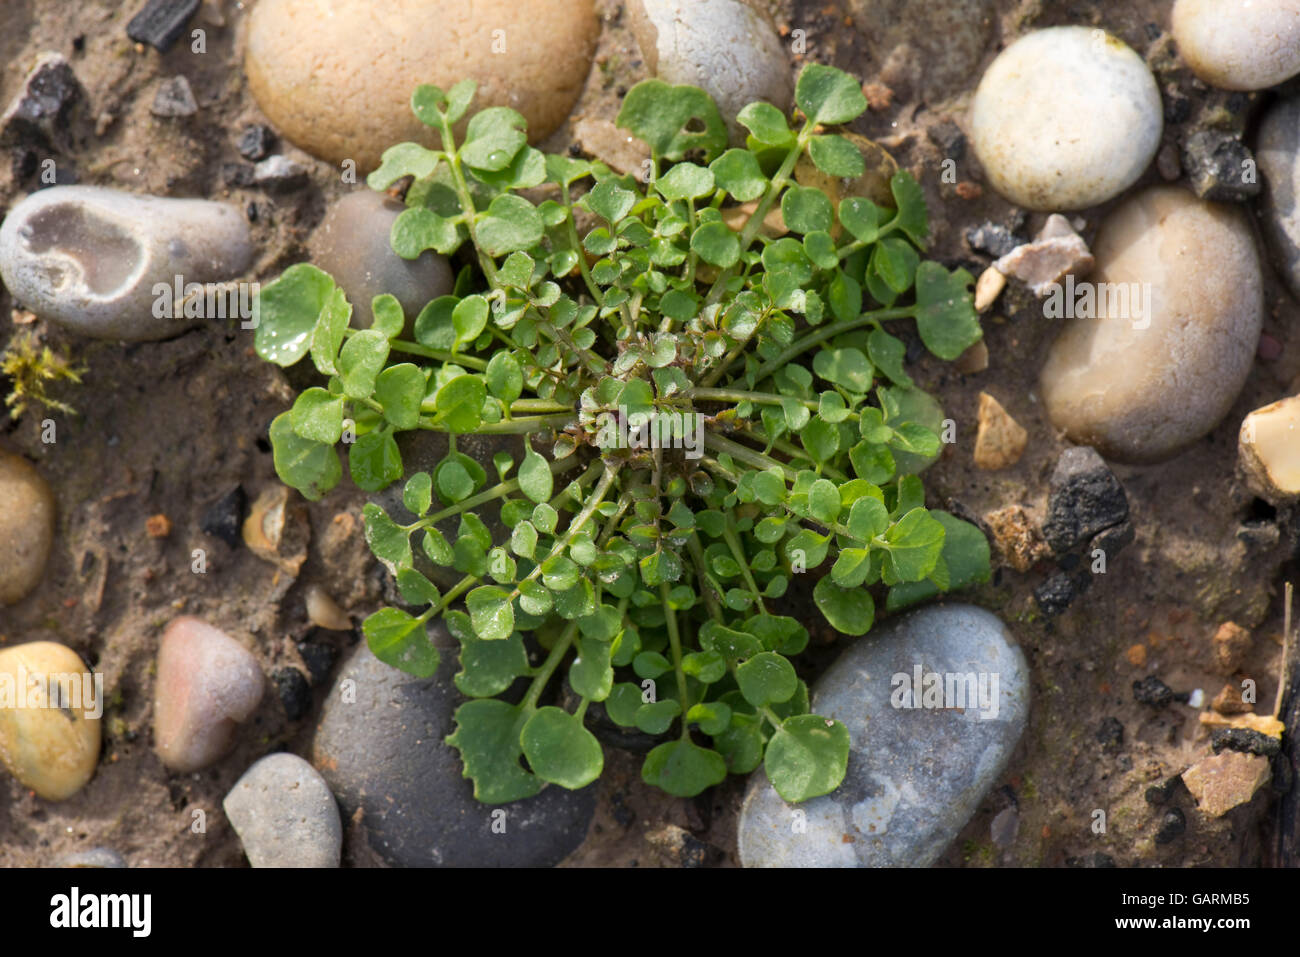 A hairy bittercress, Cardamine  hirsuta, plant leaf rosette, a common garden weed, February Stock Photo